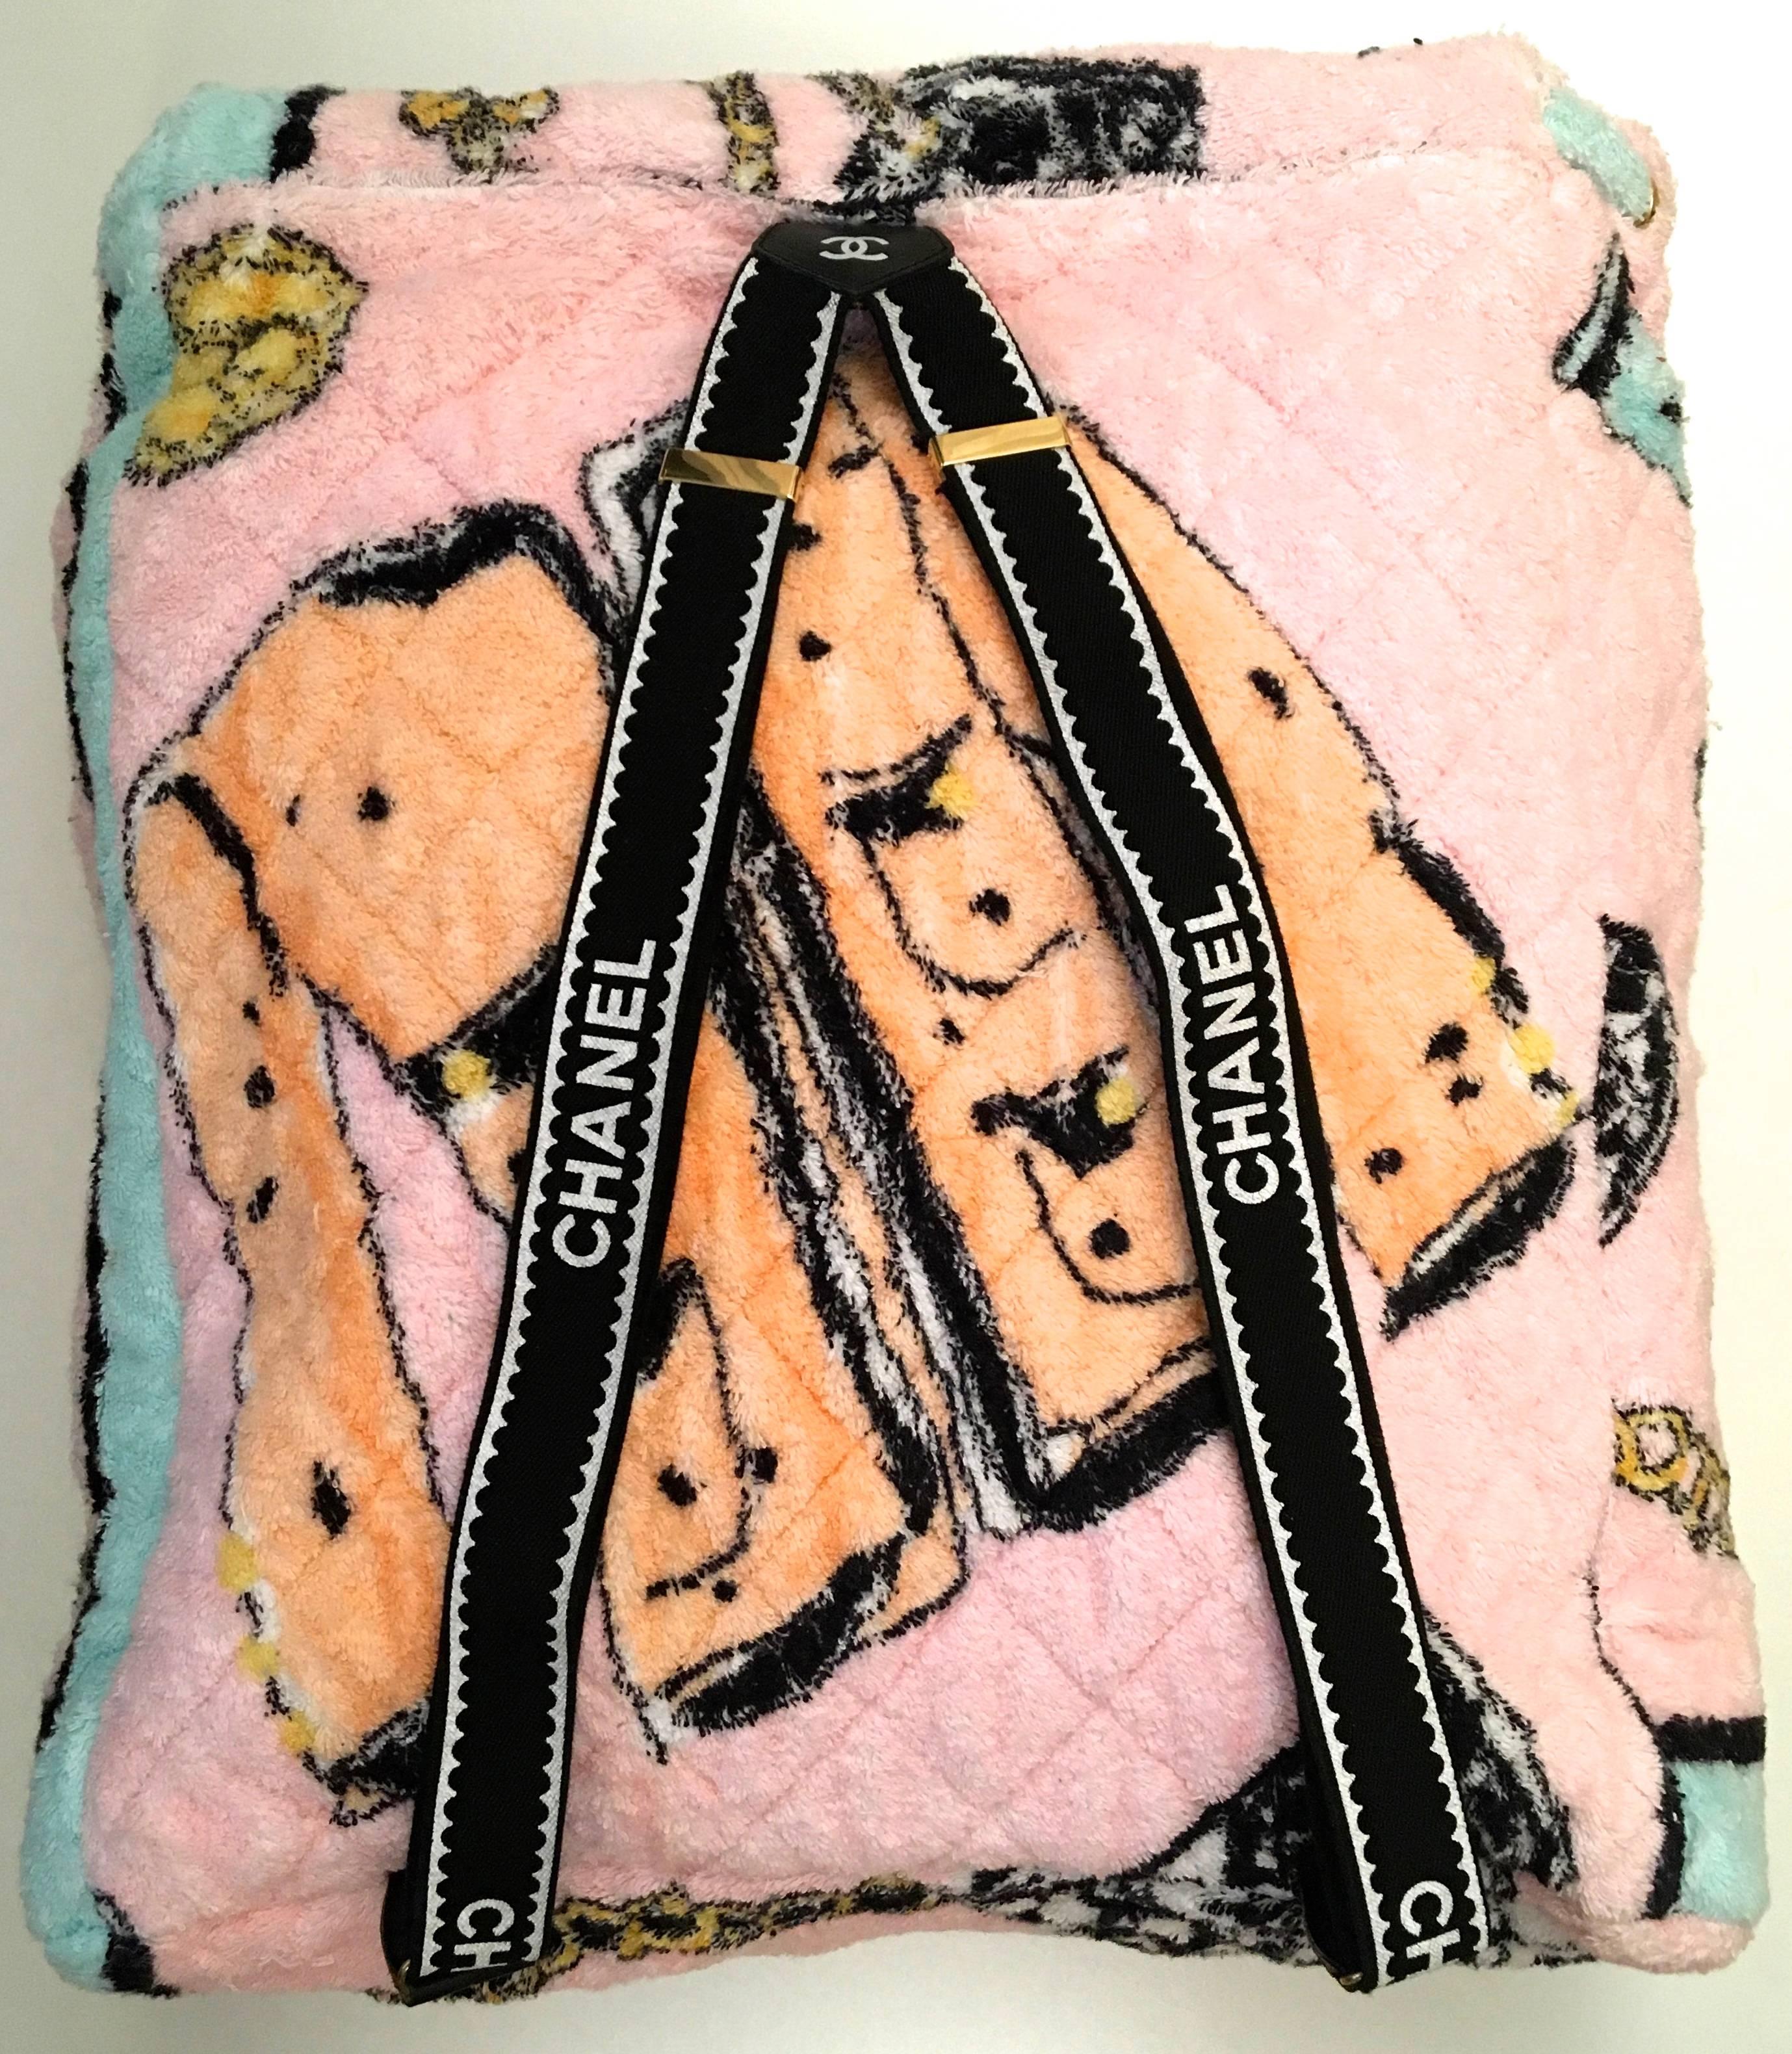 Presented here is a very rare terry cloth backpackfrom Chanel. This rare collector's item is from their Spring / Summer collection in 1994 and it appears to have never been used. The backpack is constructed of colorful terry cloth throughout and has